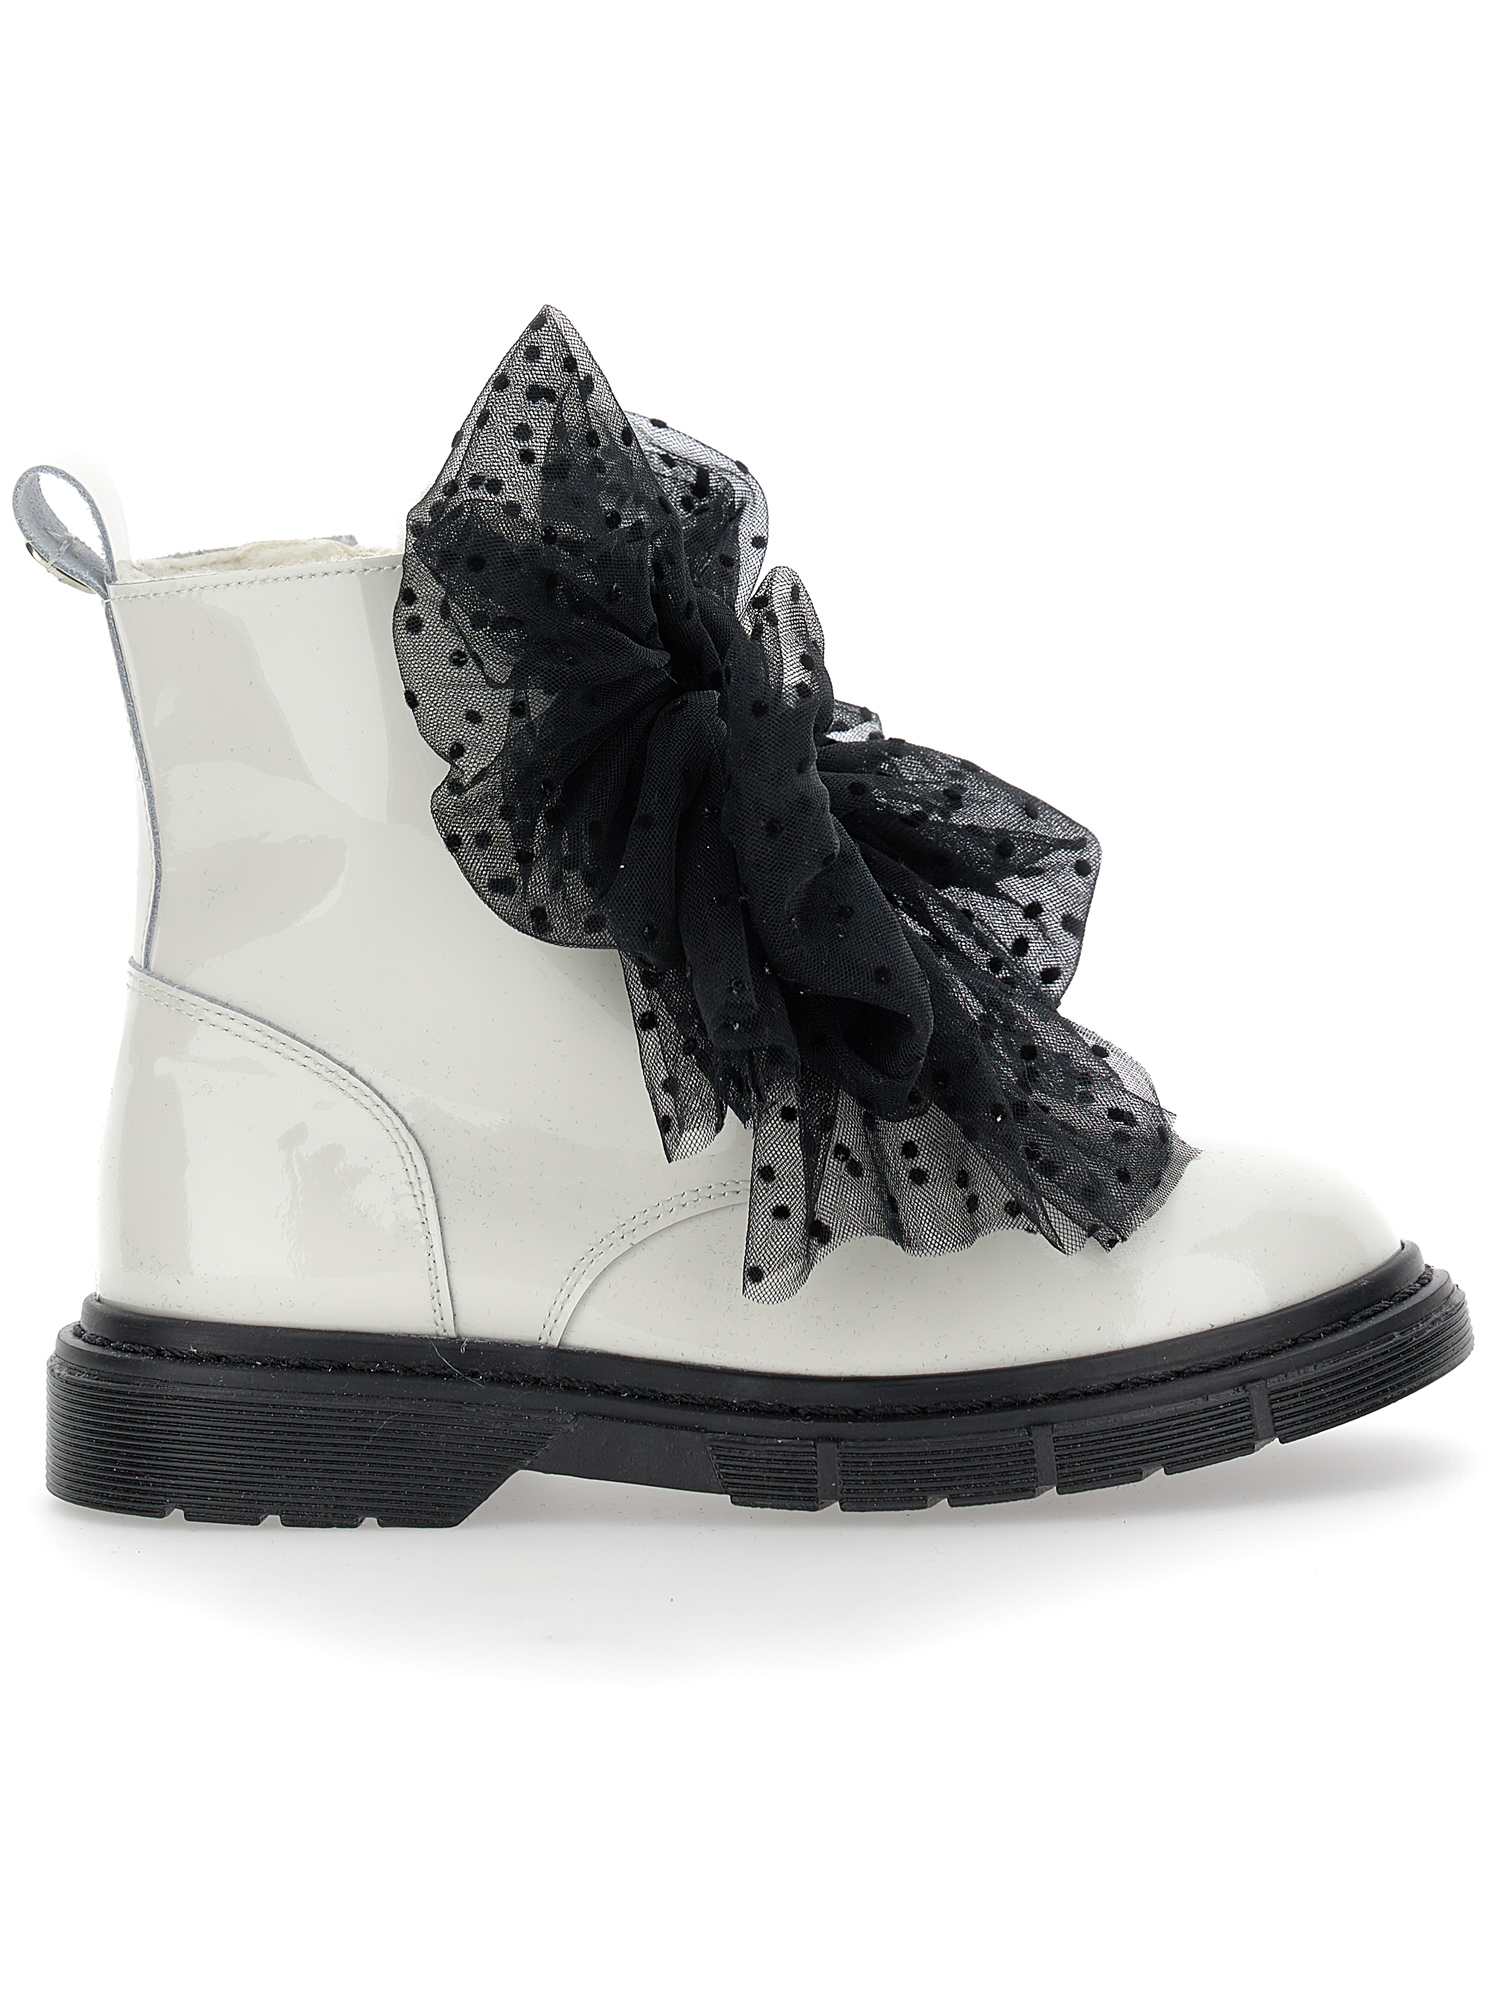 Monnalisa Sheepskin And Leather Combat Boots With Bows In Cream + Black